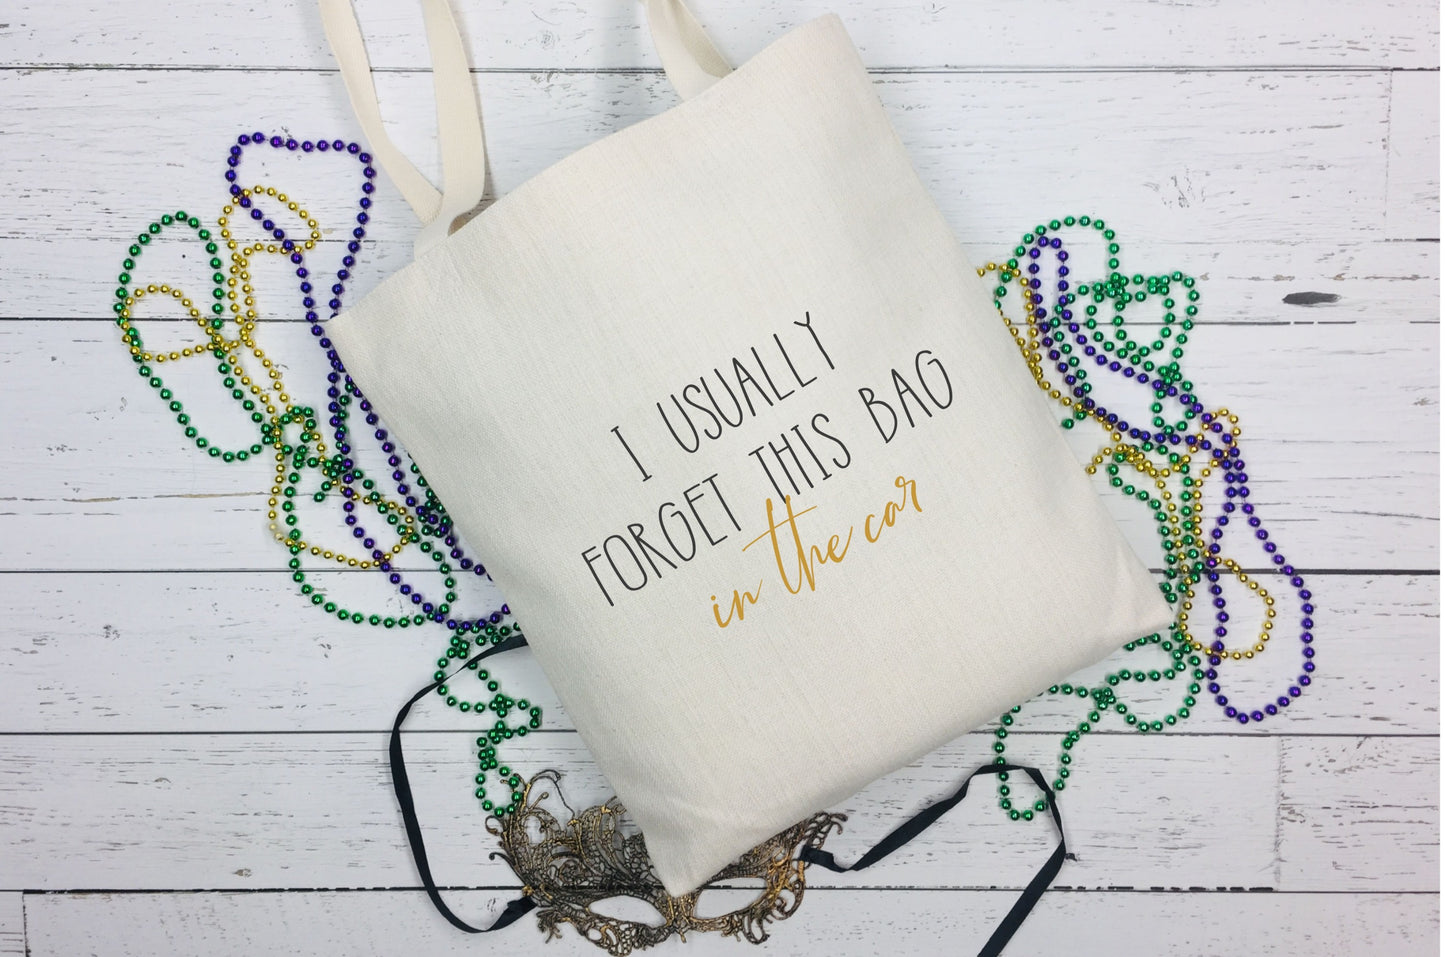 "I Usually Forget This Bag in the Car" Canvas Tote Bag!